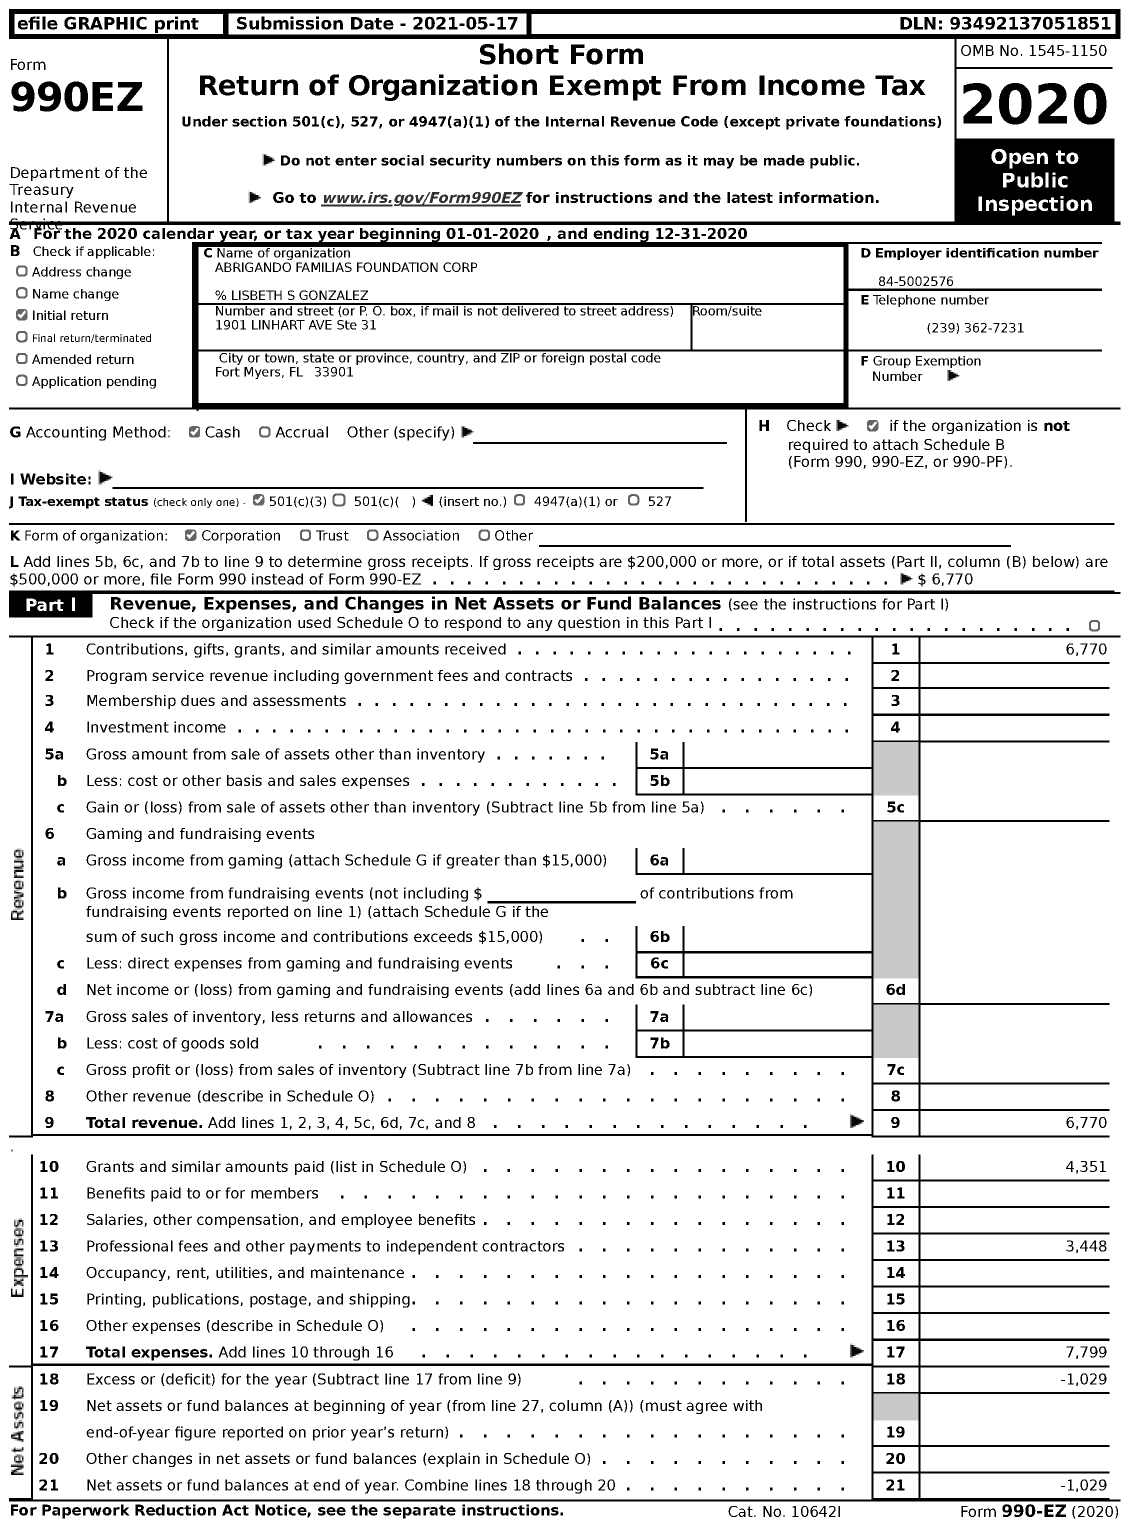 Image of first page of 2020 Form 990EZ for Abrigando Familias Foundation Corp